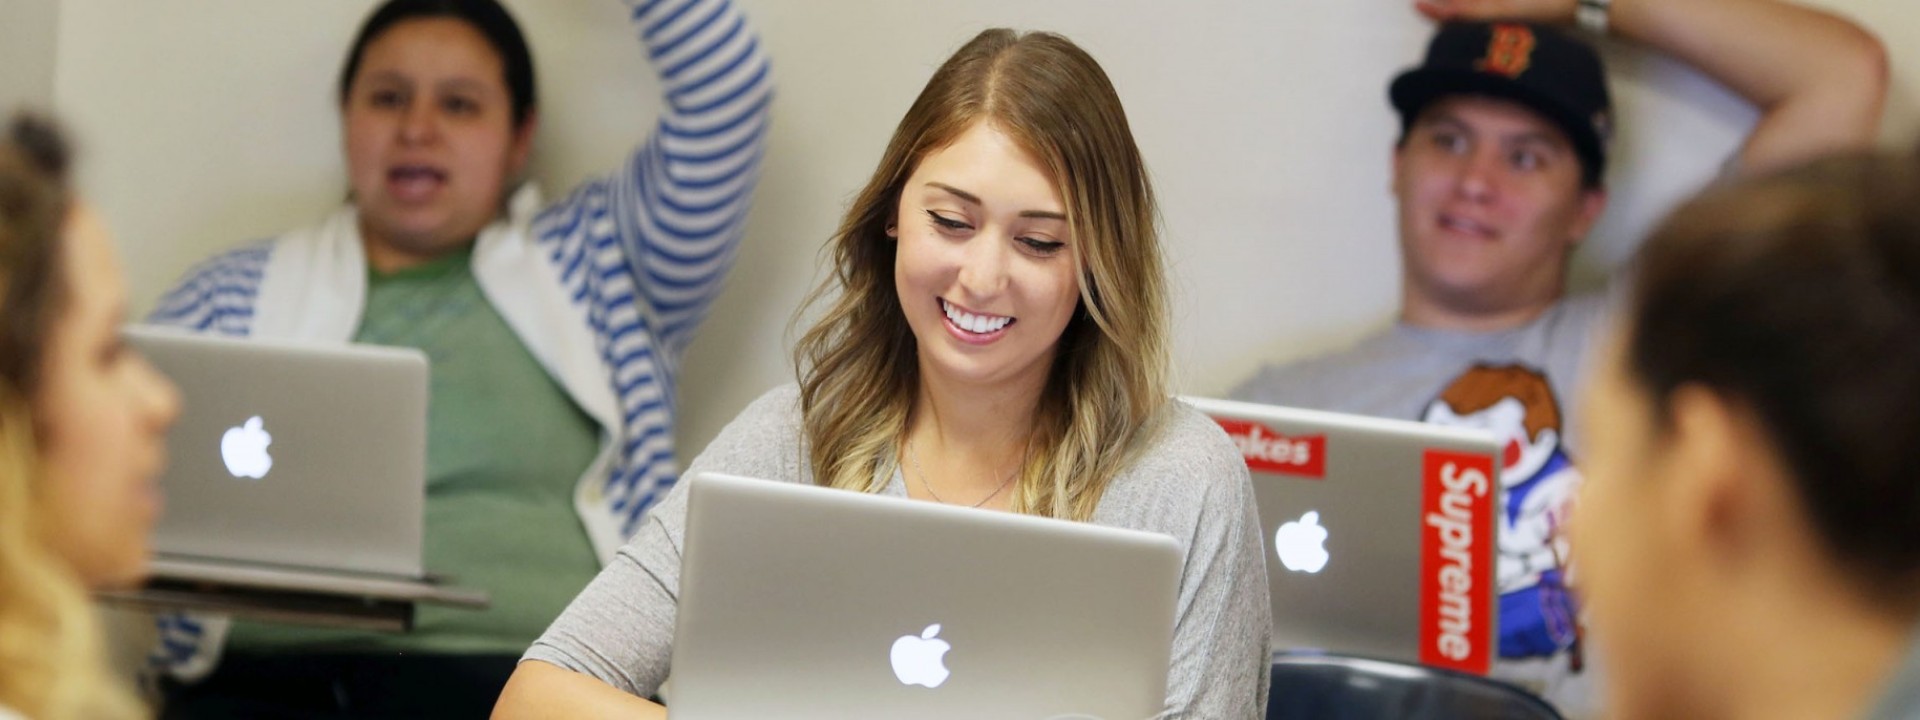 Image of a Caucasian female student smiling in a classroom setting in front of an open laptop. 